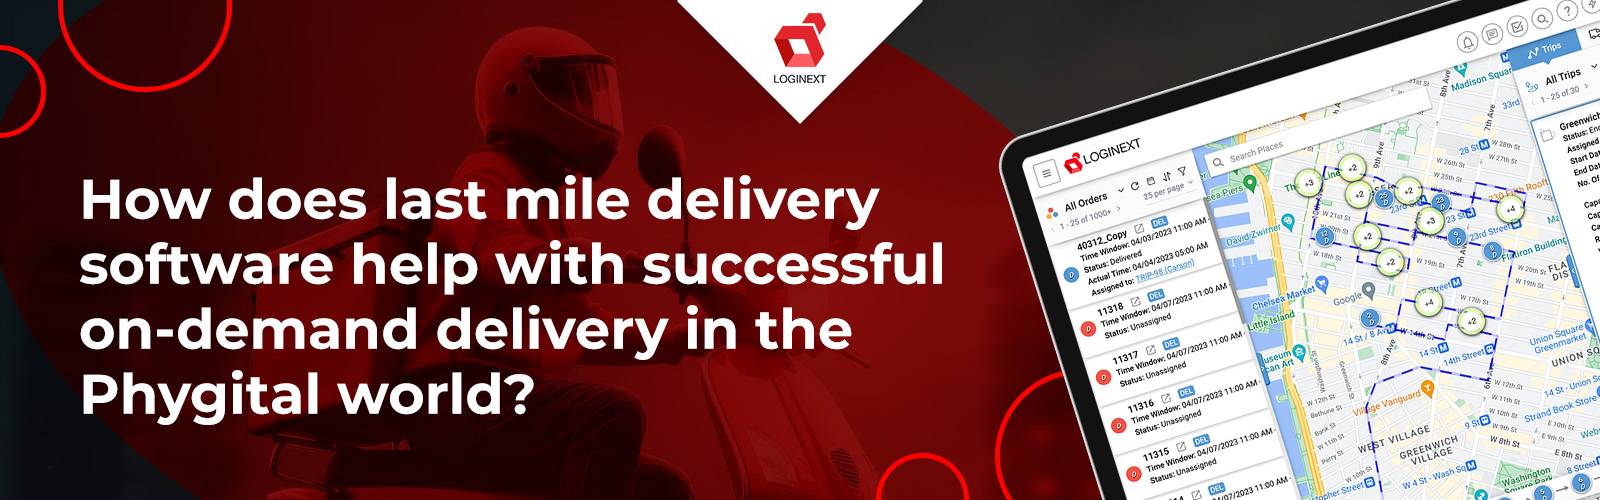 How does last mile delivery software help with successful on-demand delivery in the Phygital world?